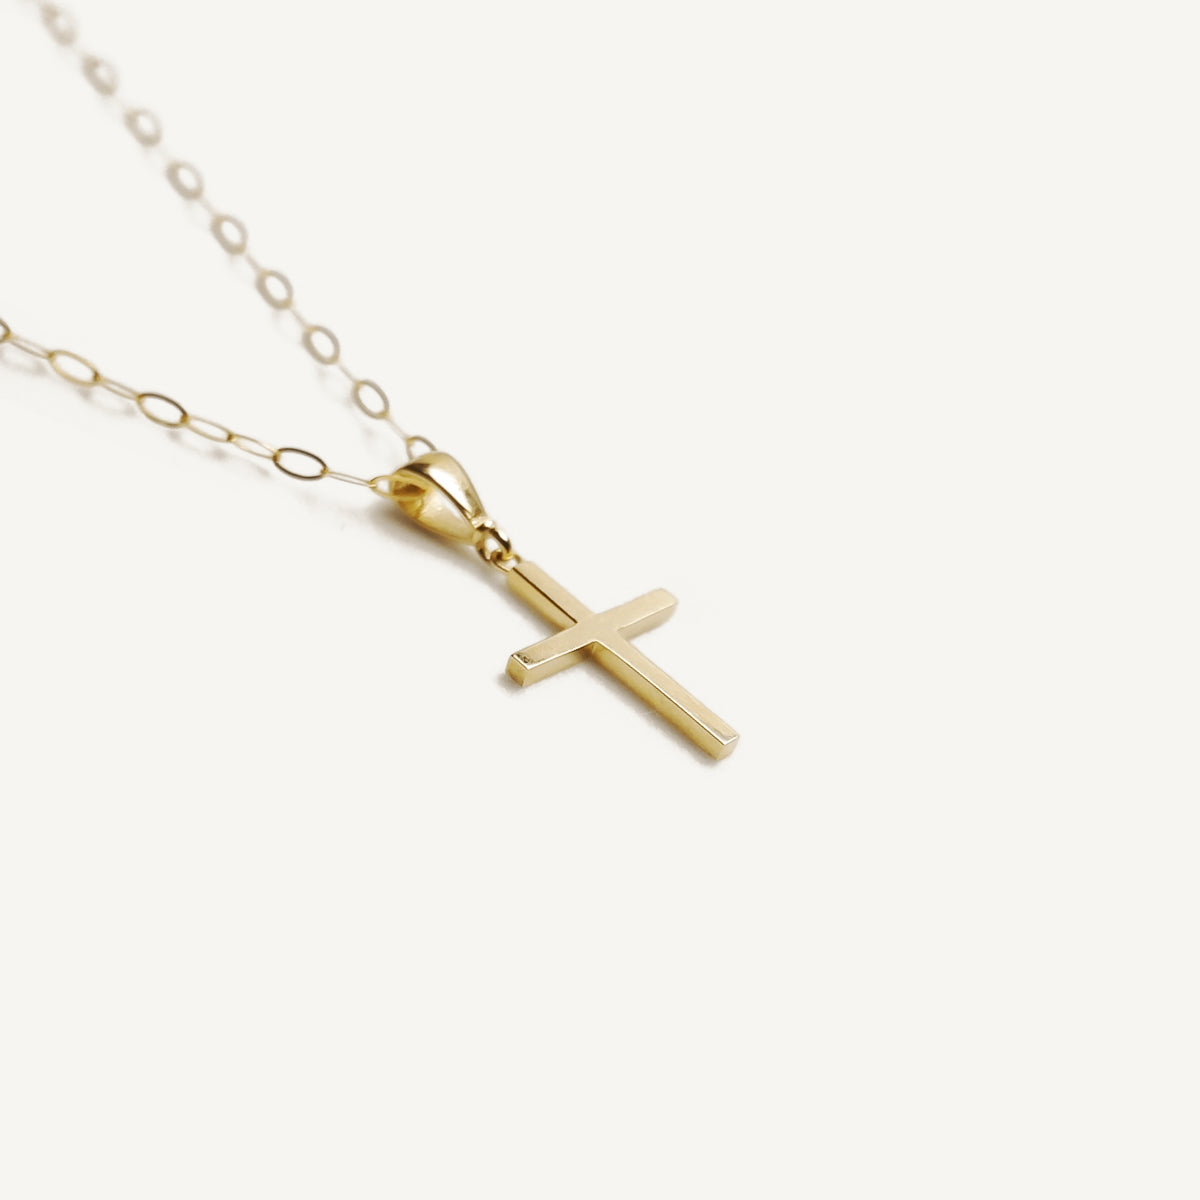 The Statement Cross Pendant in Solid Gold